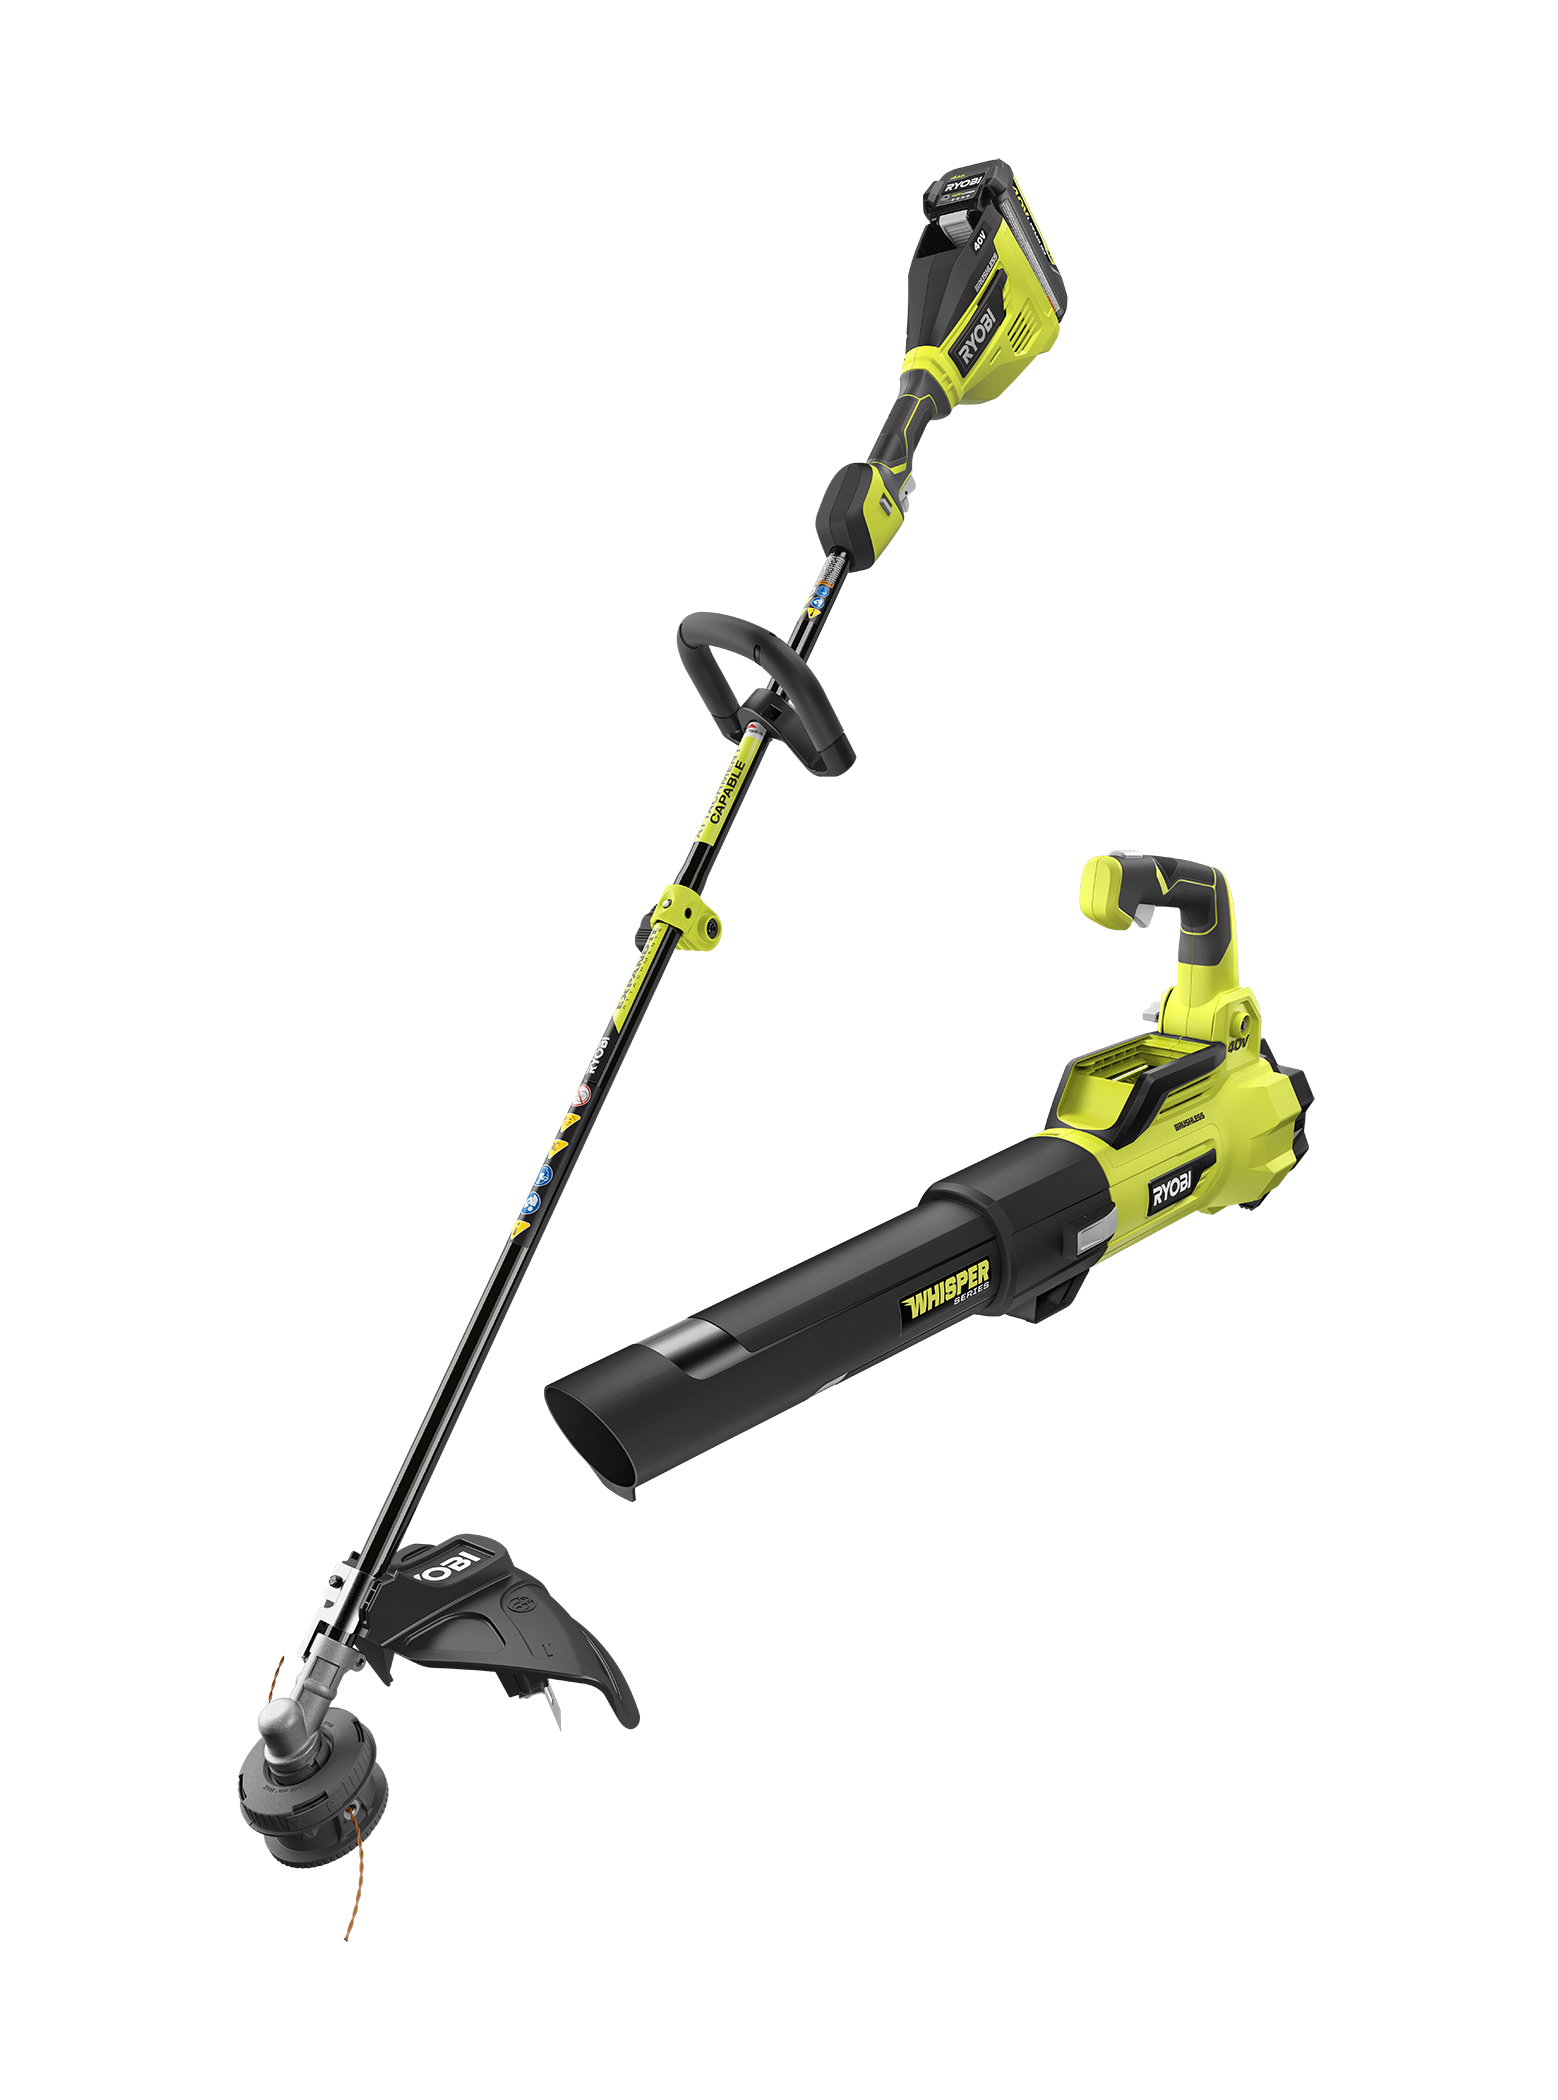 Ryobi 40V Cordless Battery String Trimmer and Jet Fan Blower Combo Kit (2-Tools) with 4.0 Ah Battery and Charger